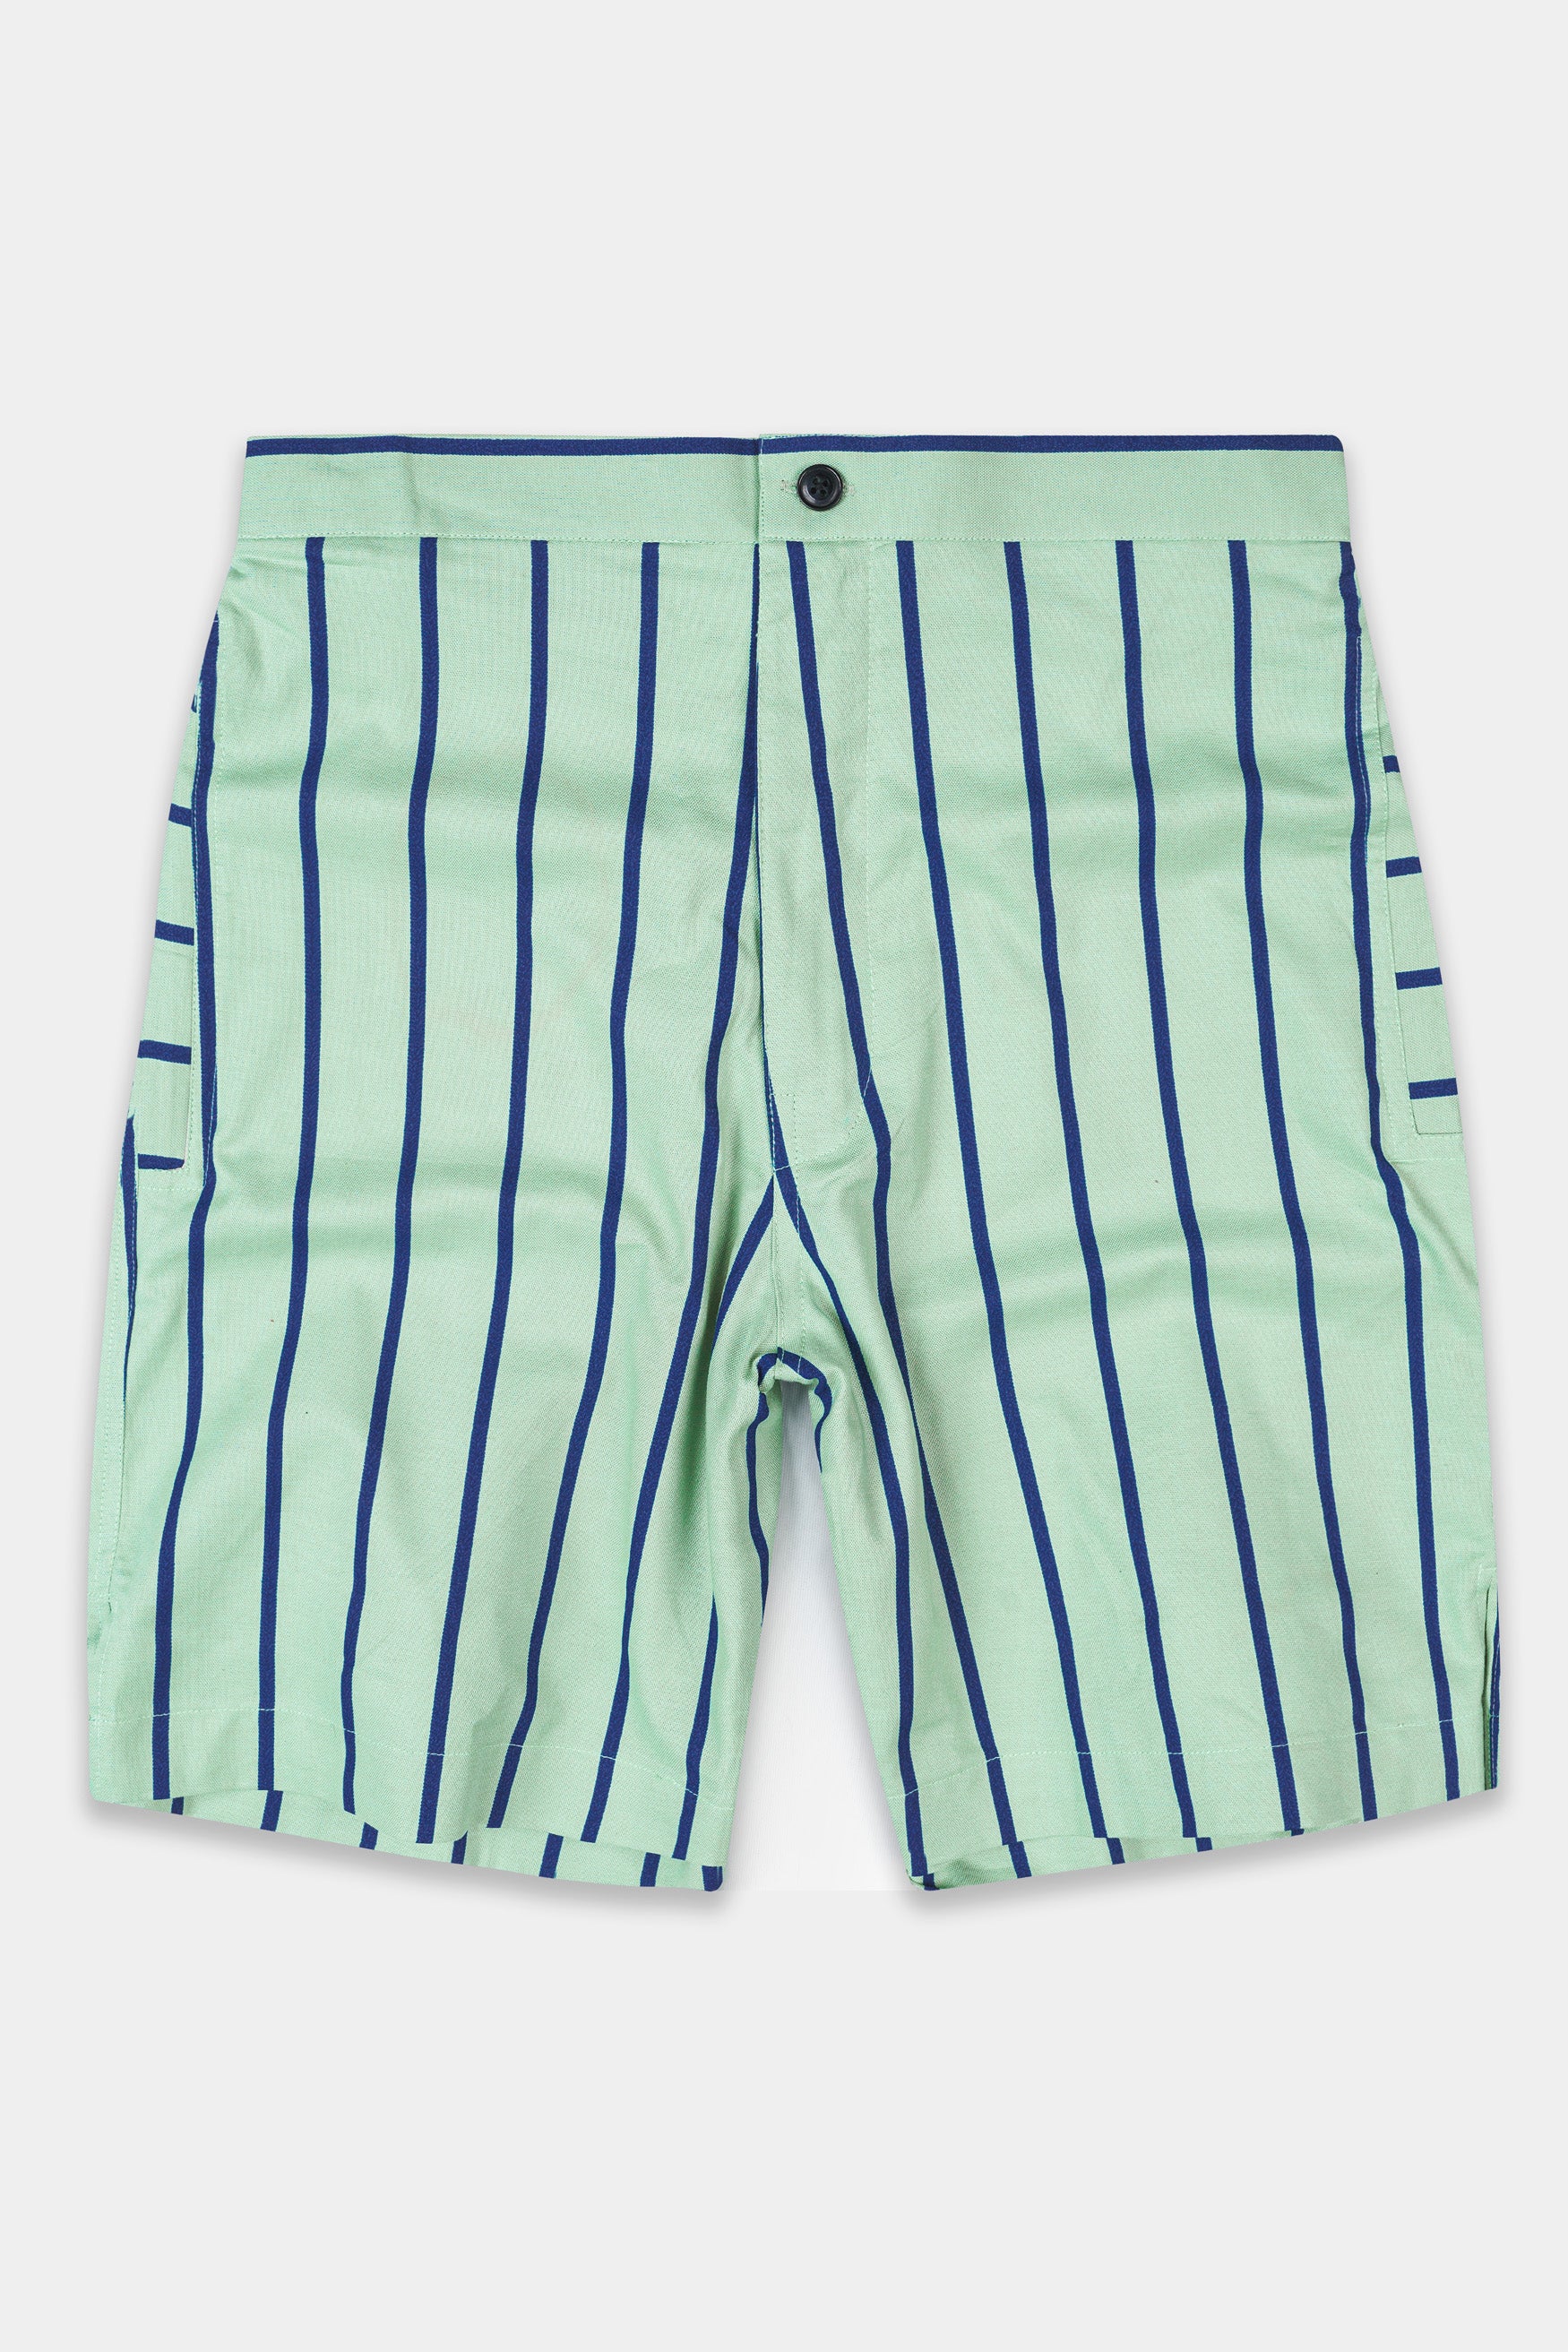 Surf Green with Cobalt Blue Striped Oxford Shorts SR350-28,  SR350-30,  SR350-32,  SR350-34,  SR350-36,  SR350-38,  SR350-40,  SR350-42,  SR350-44